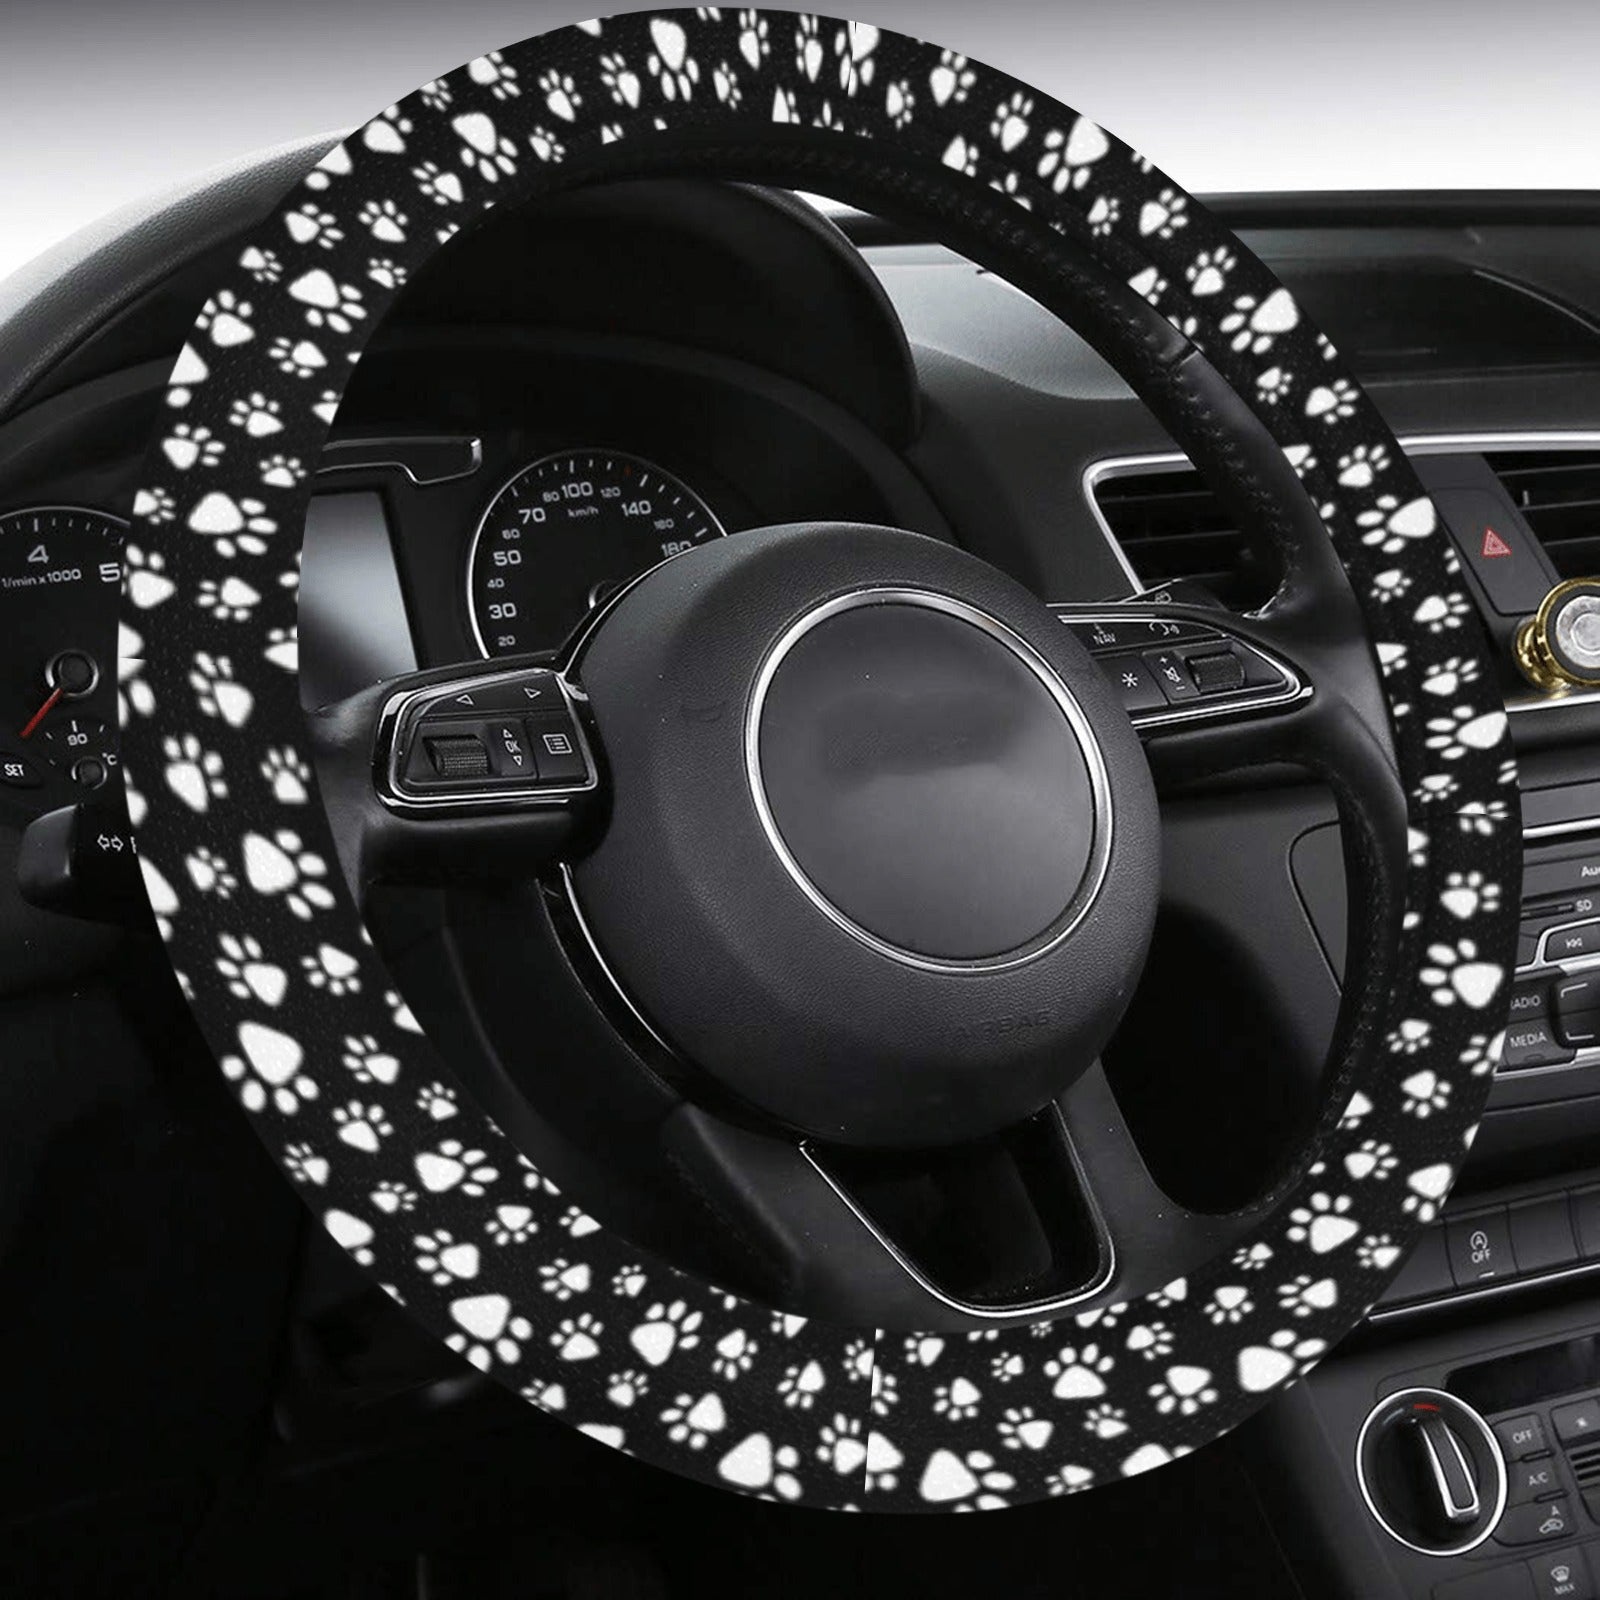 Pet Paws Steering Wheel Cover with Anti-Slip Insert, Black Cat Dog Animal Print Car Women Auto Wrap Protector Accessories Starcove Fashion